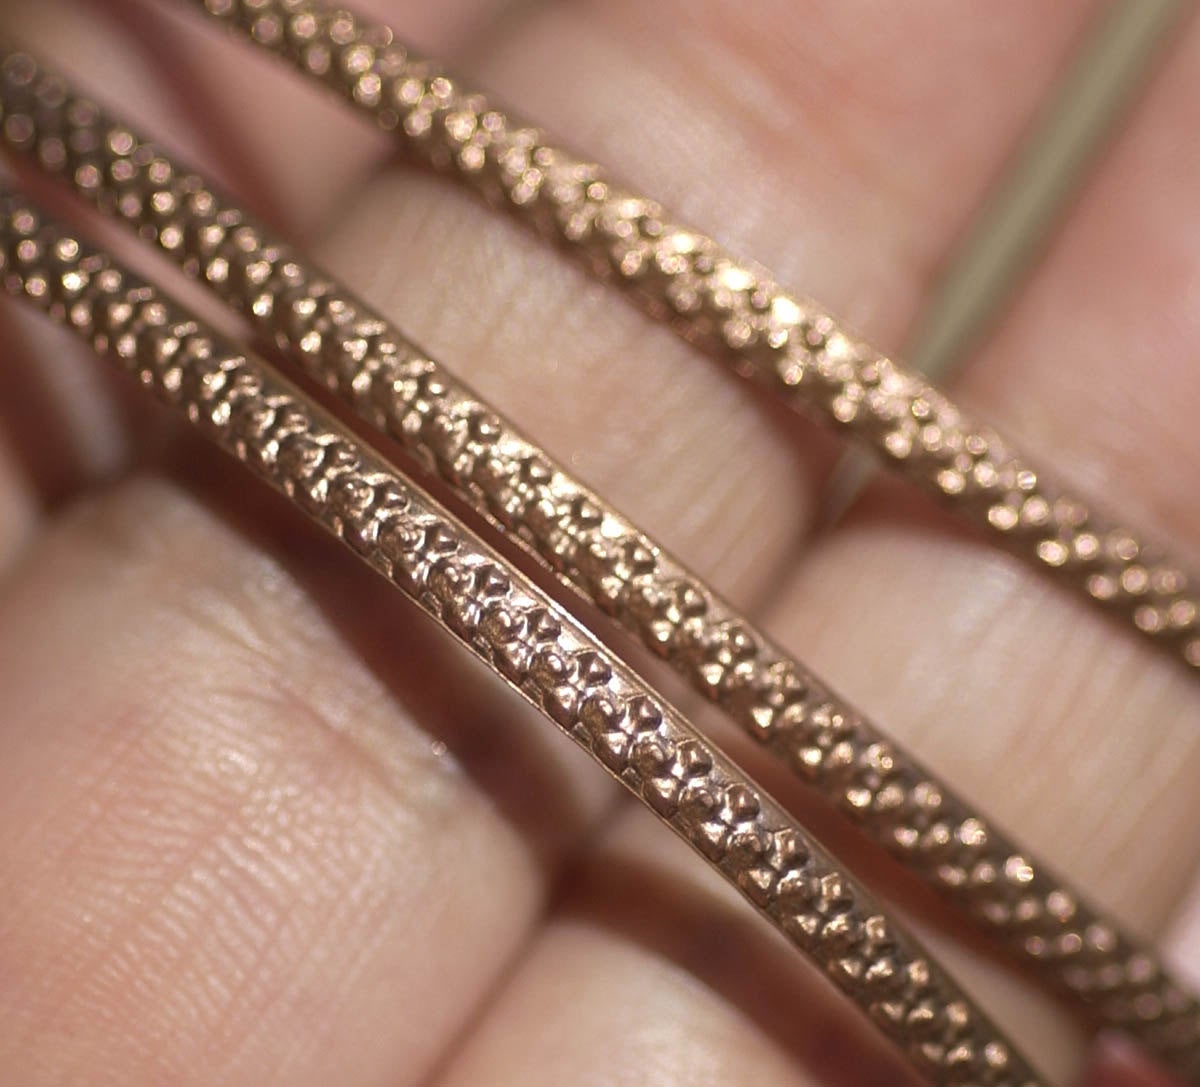 Double dot patterned wire 2.6mm gallery wire for making rings, solid copper, raw brass, pure bronze